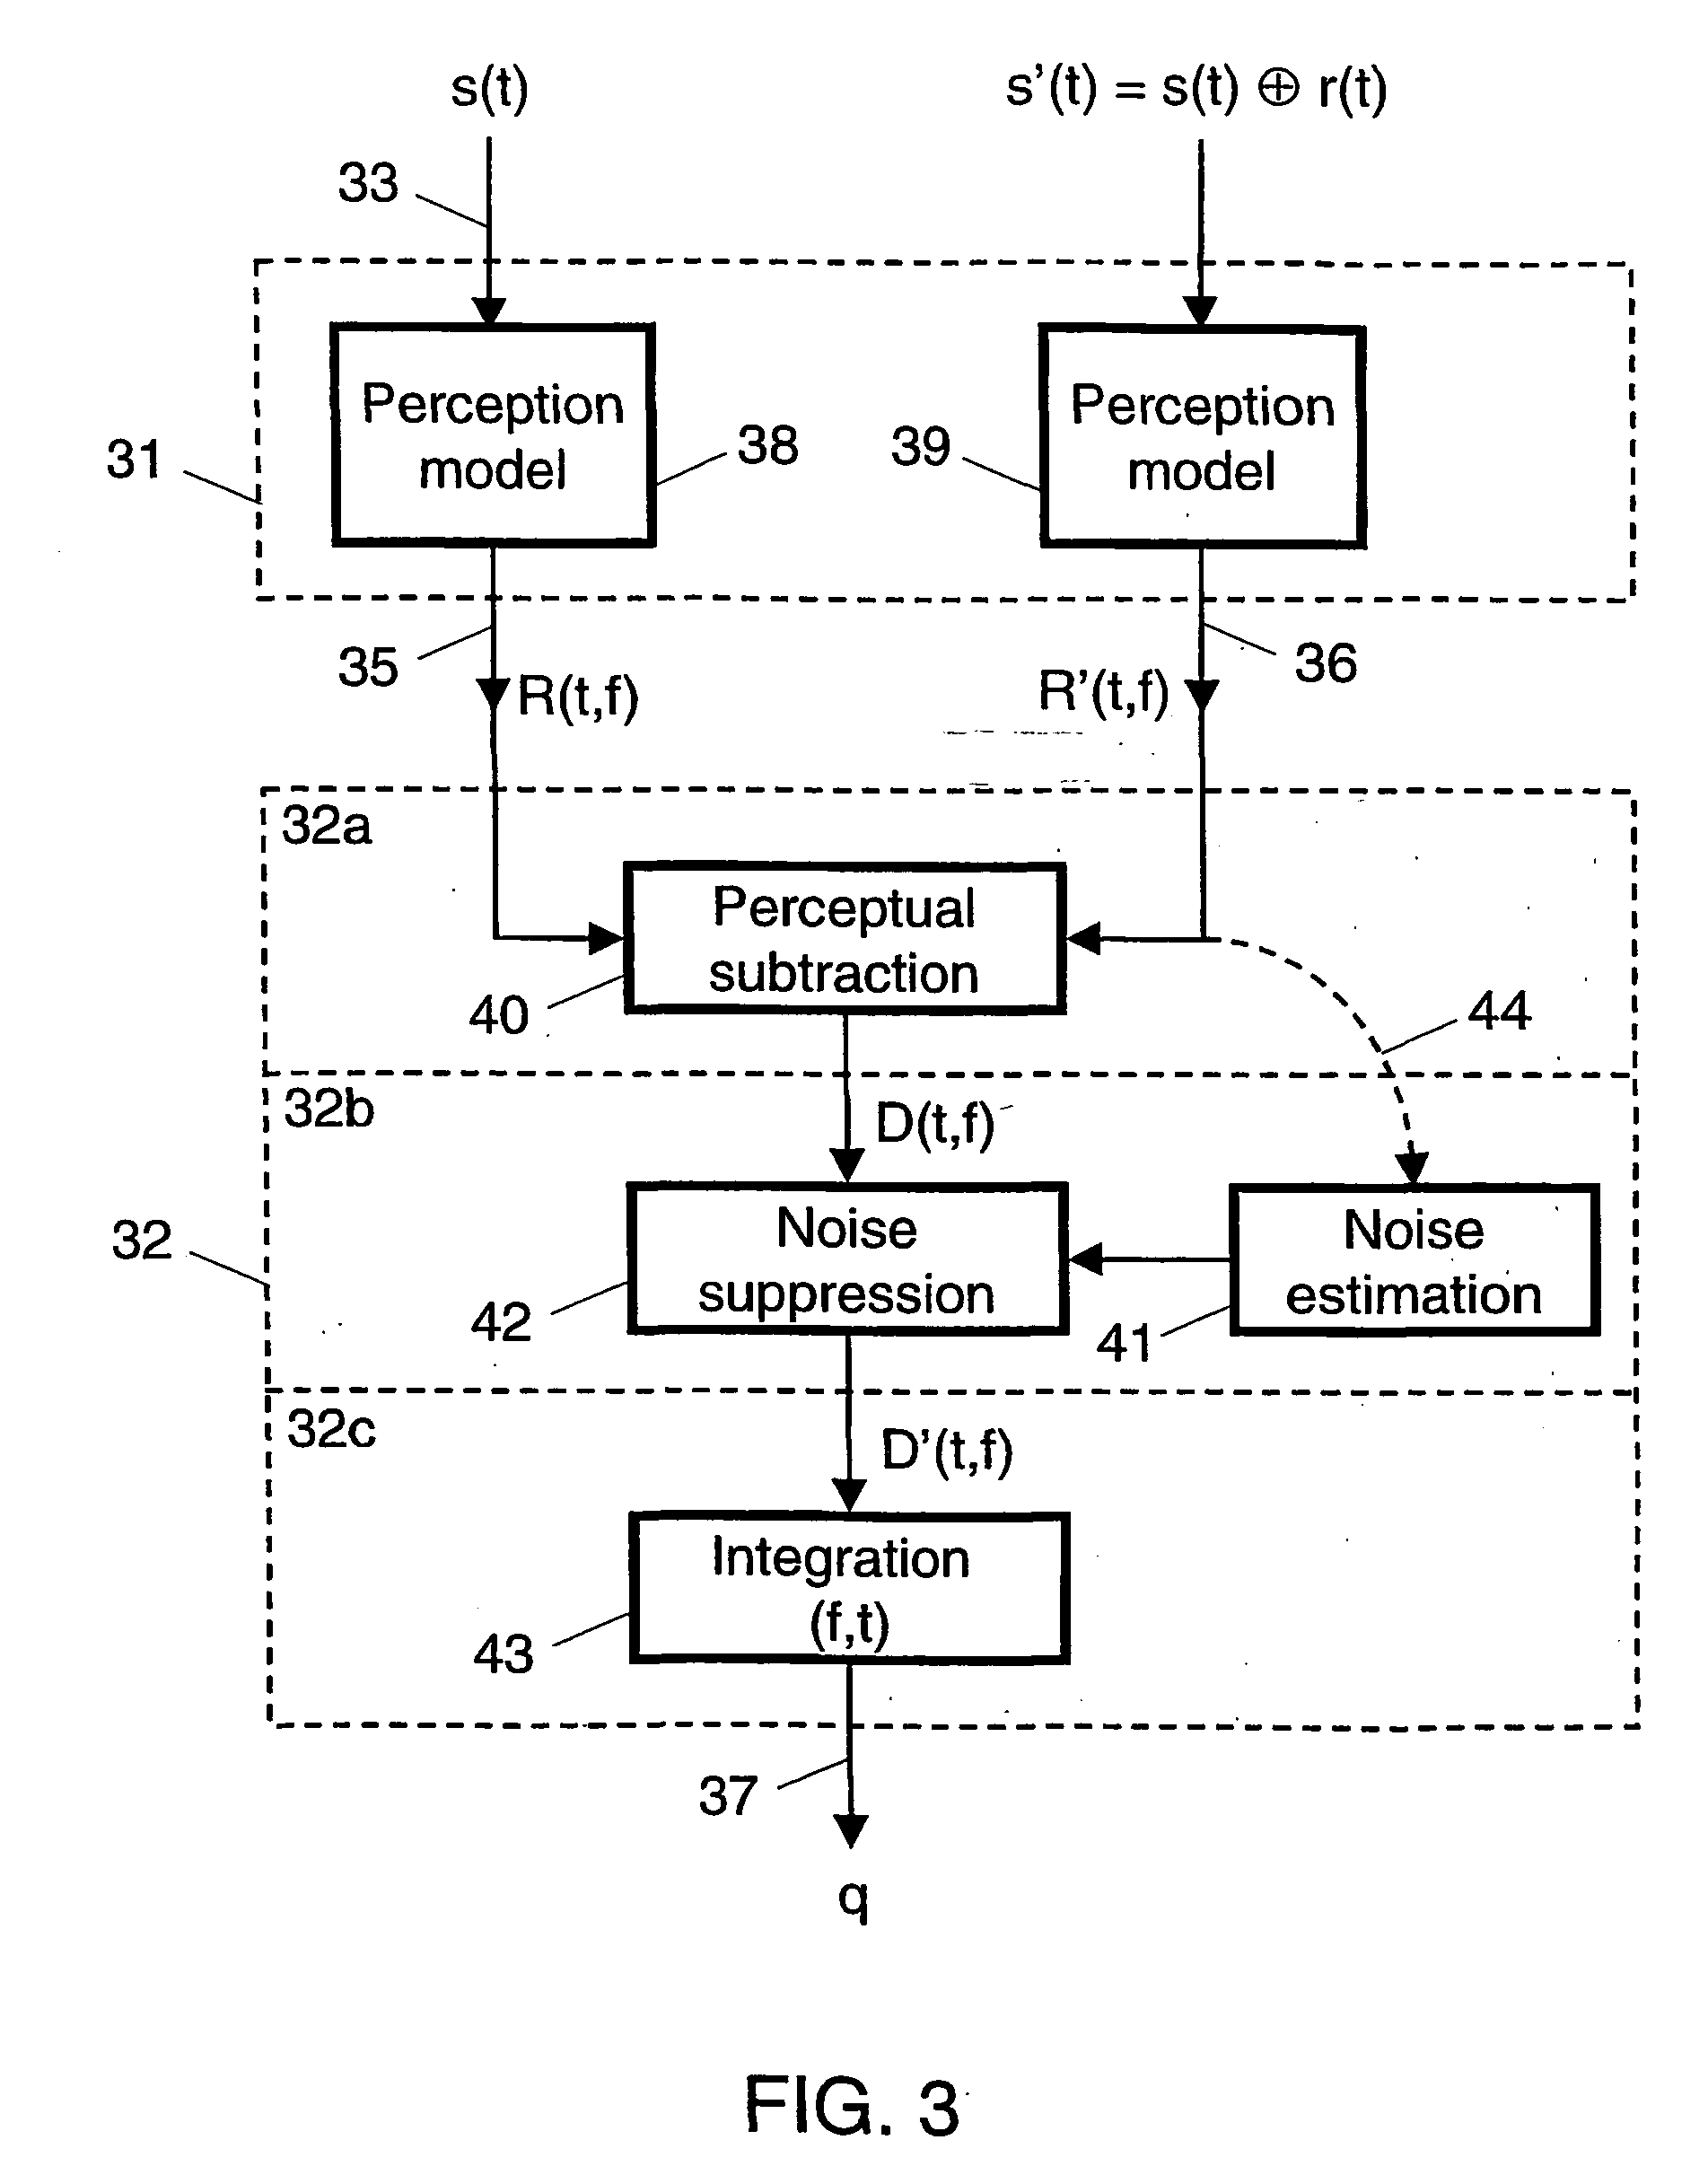 Measuring a talking quality of a telephone link in a telecommunications nework